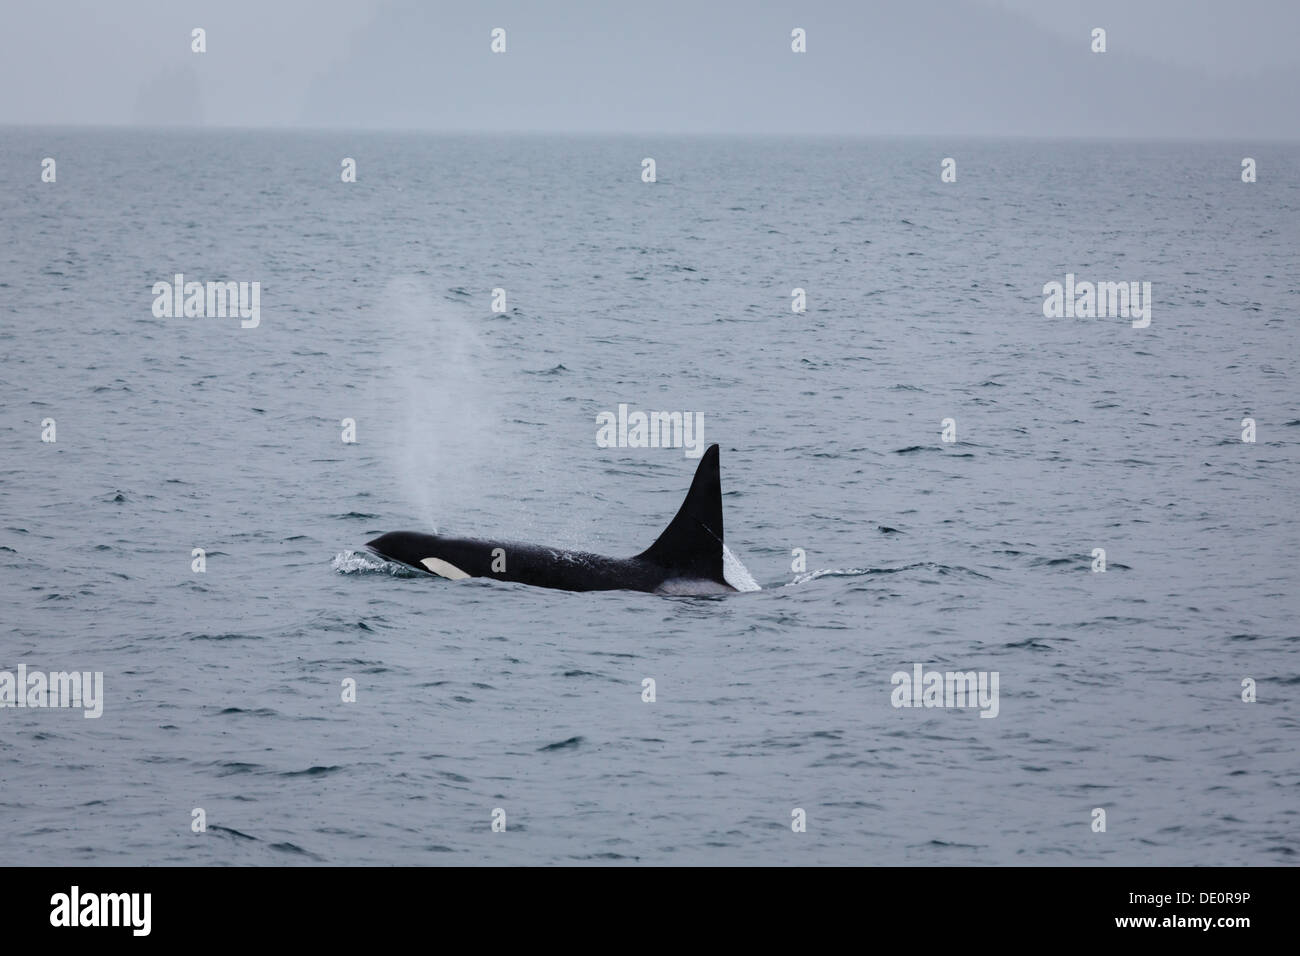 Close-up view of Orca, Killer Whale, Orcinus orca, blowing mist while surfacing to breathe in Alaskan waters Stock Photo